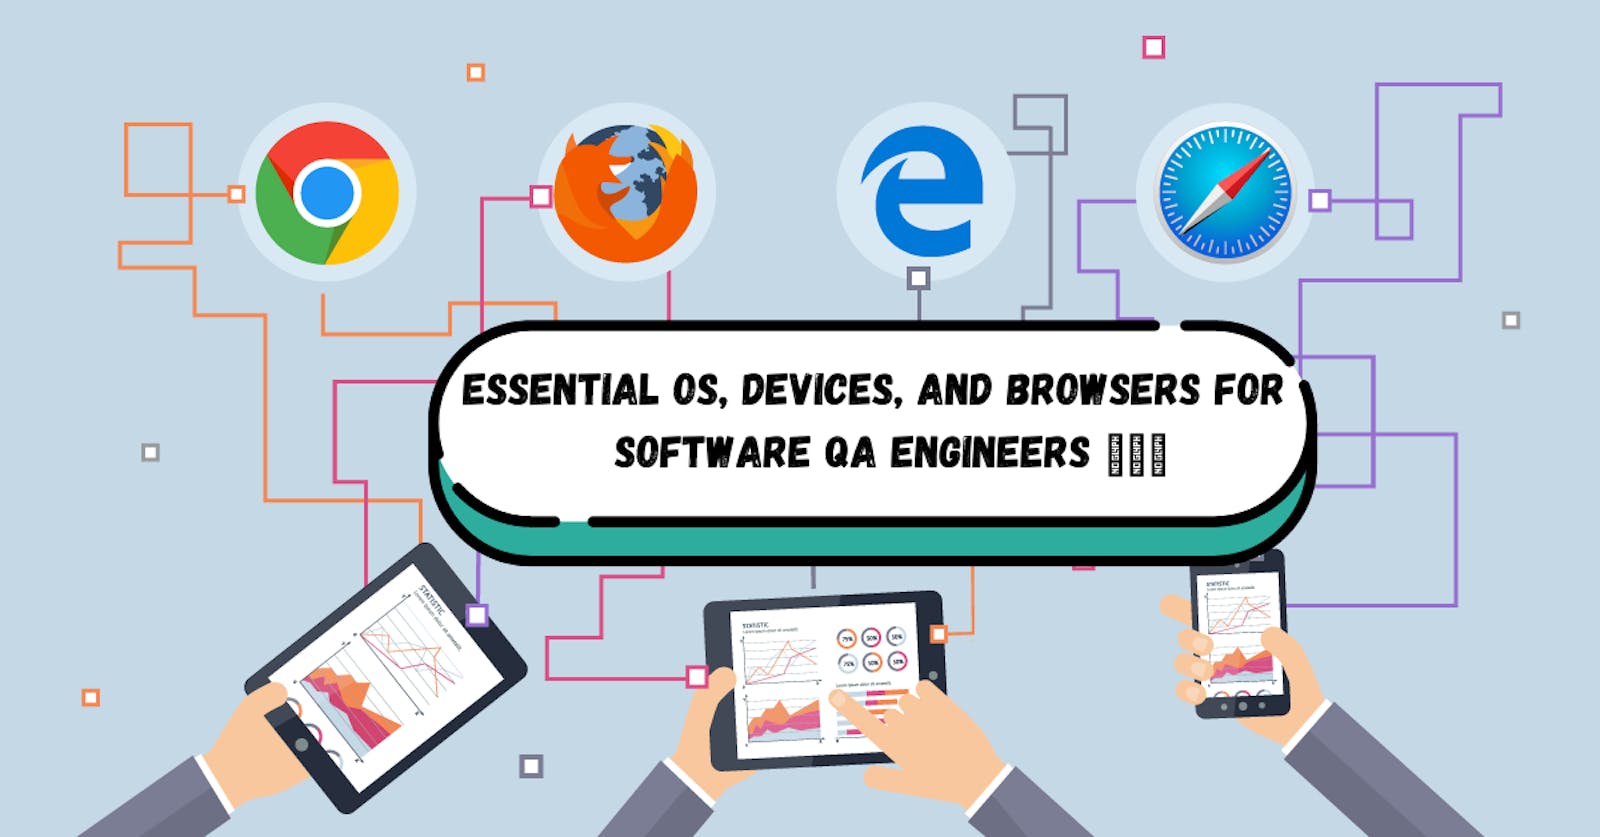 Essential OS, Devices, and Browsers for Software QA Testing 💻📱🔍